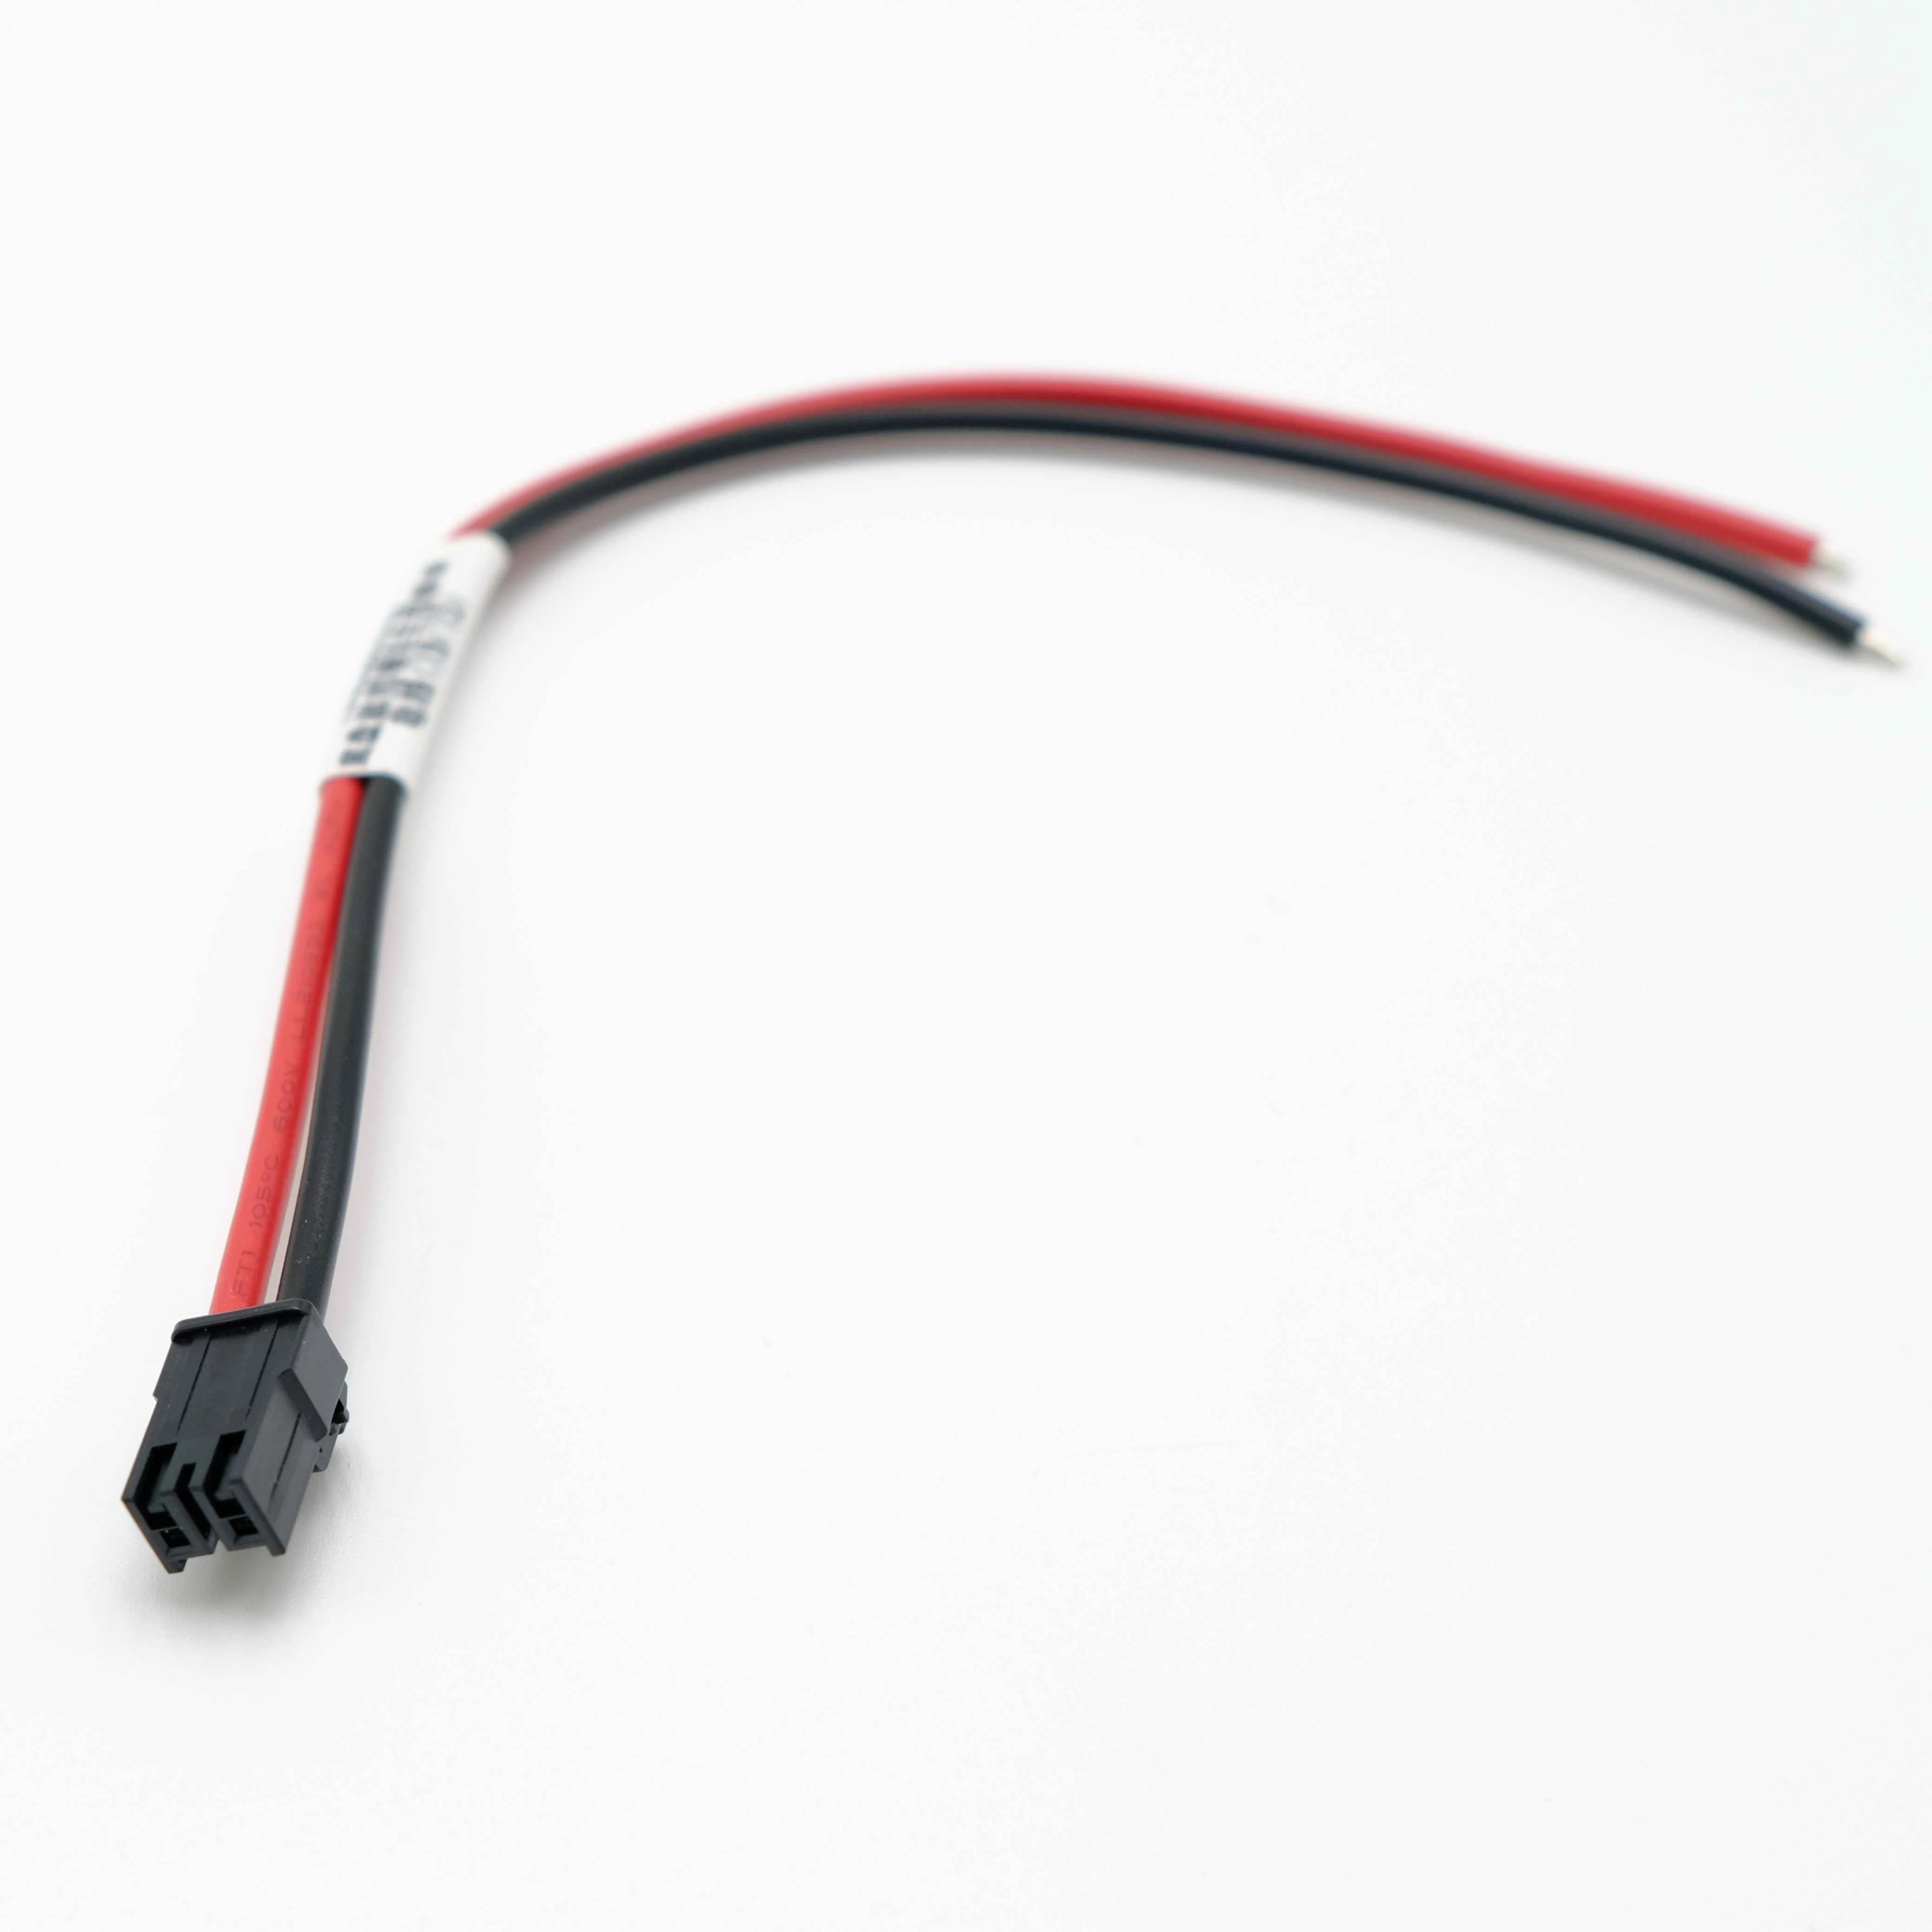 HRS3.96 2Pin Housing Wire Harness Electrical Cable Assembly for Grids Industrial Robots Drones PCB Board